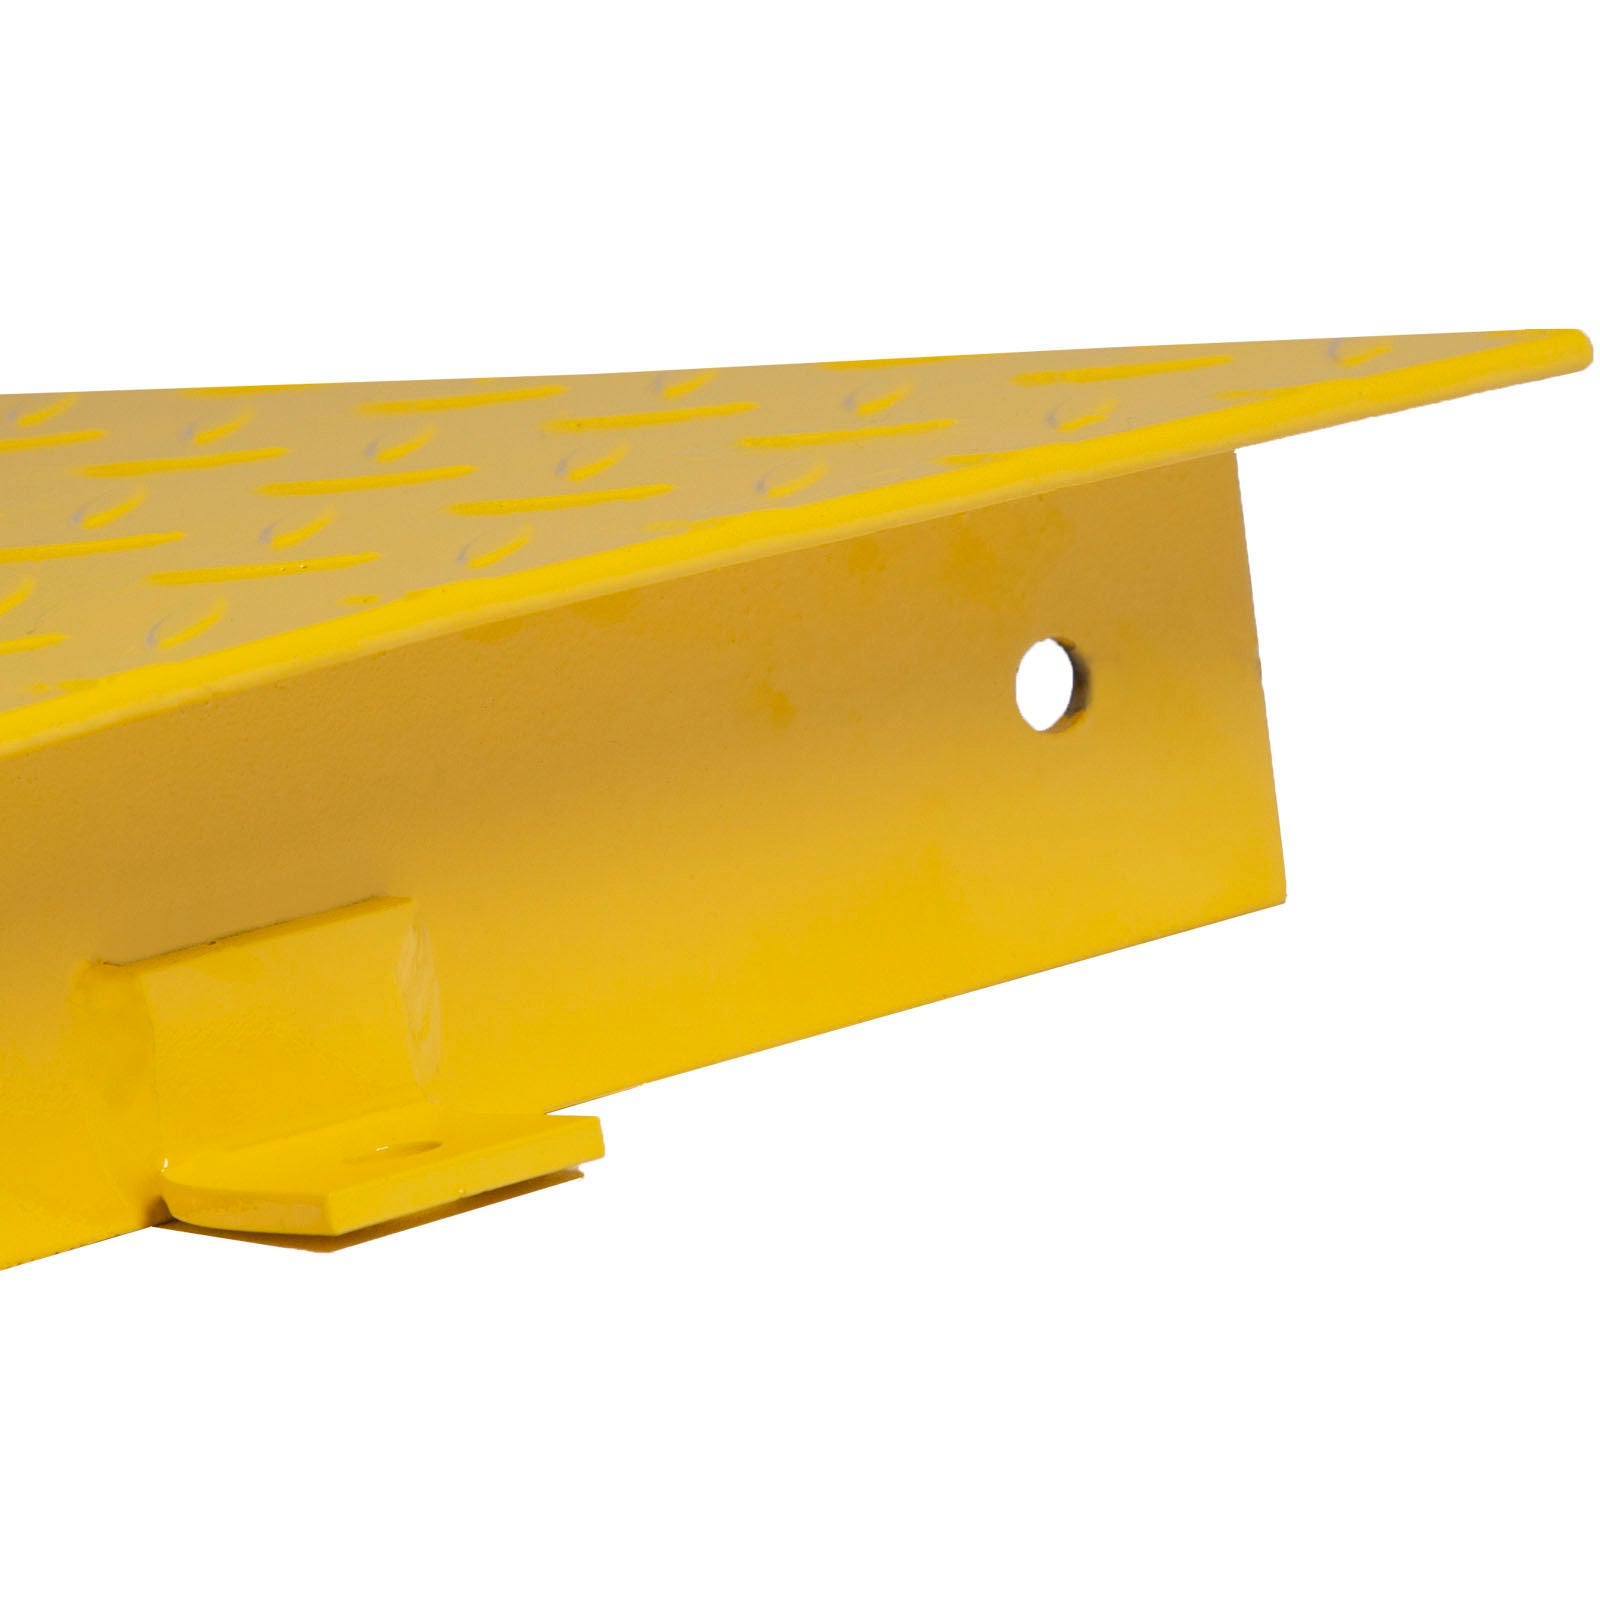 Detail shot of a yellow metallic approach ramp's lateral fastener